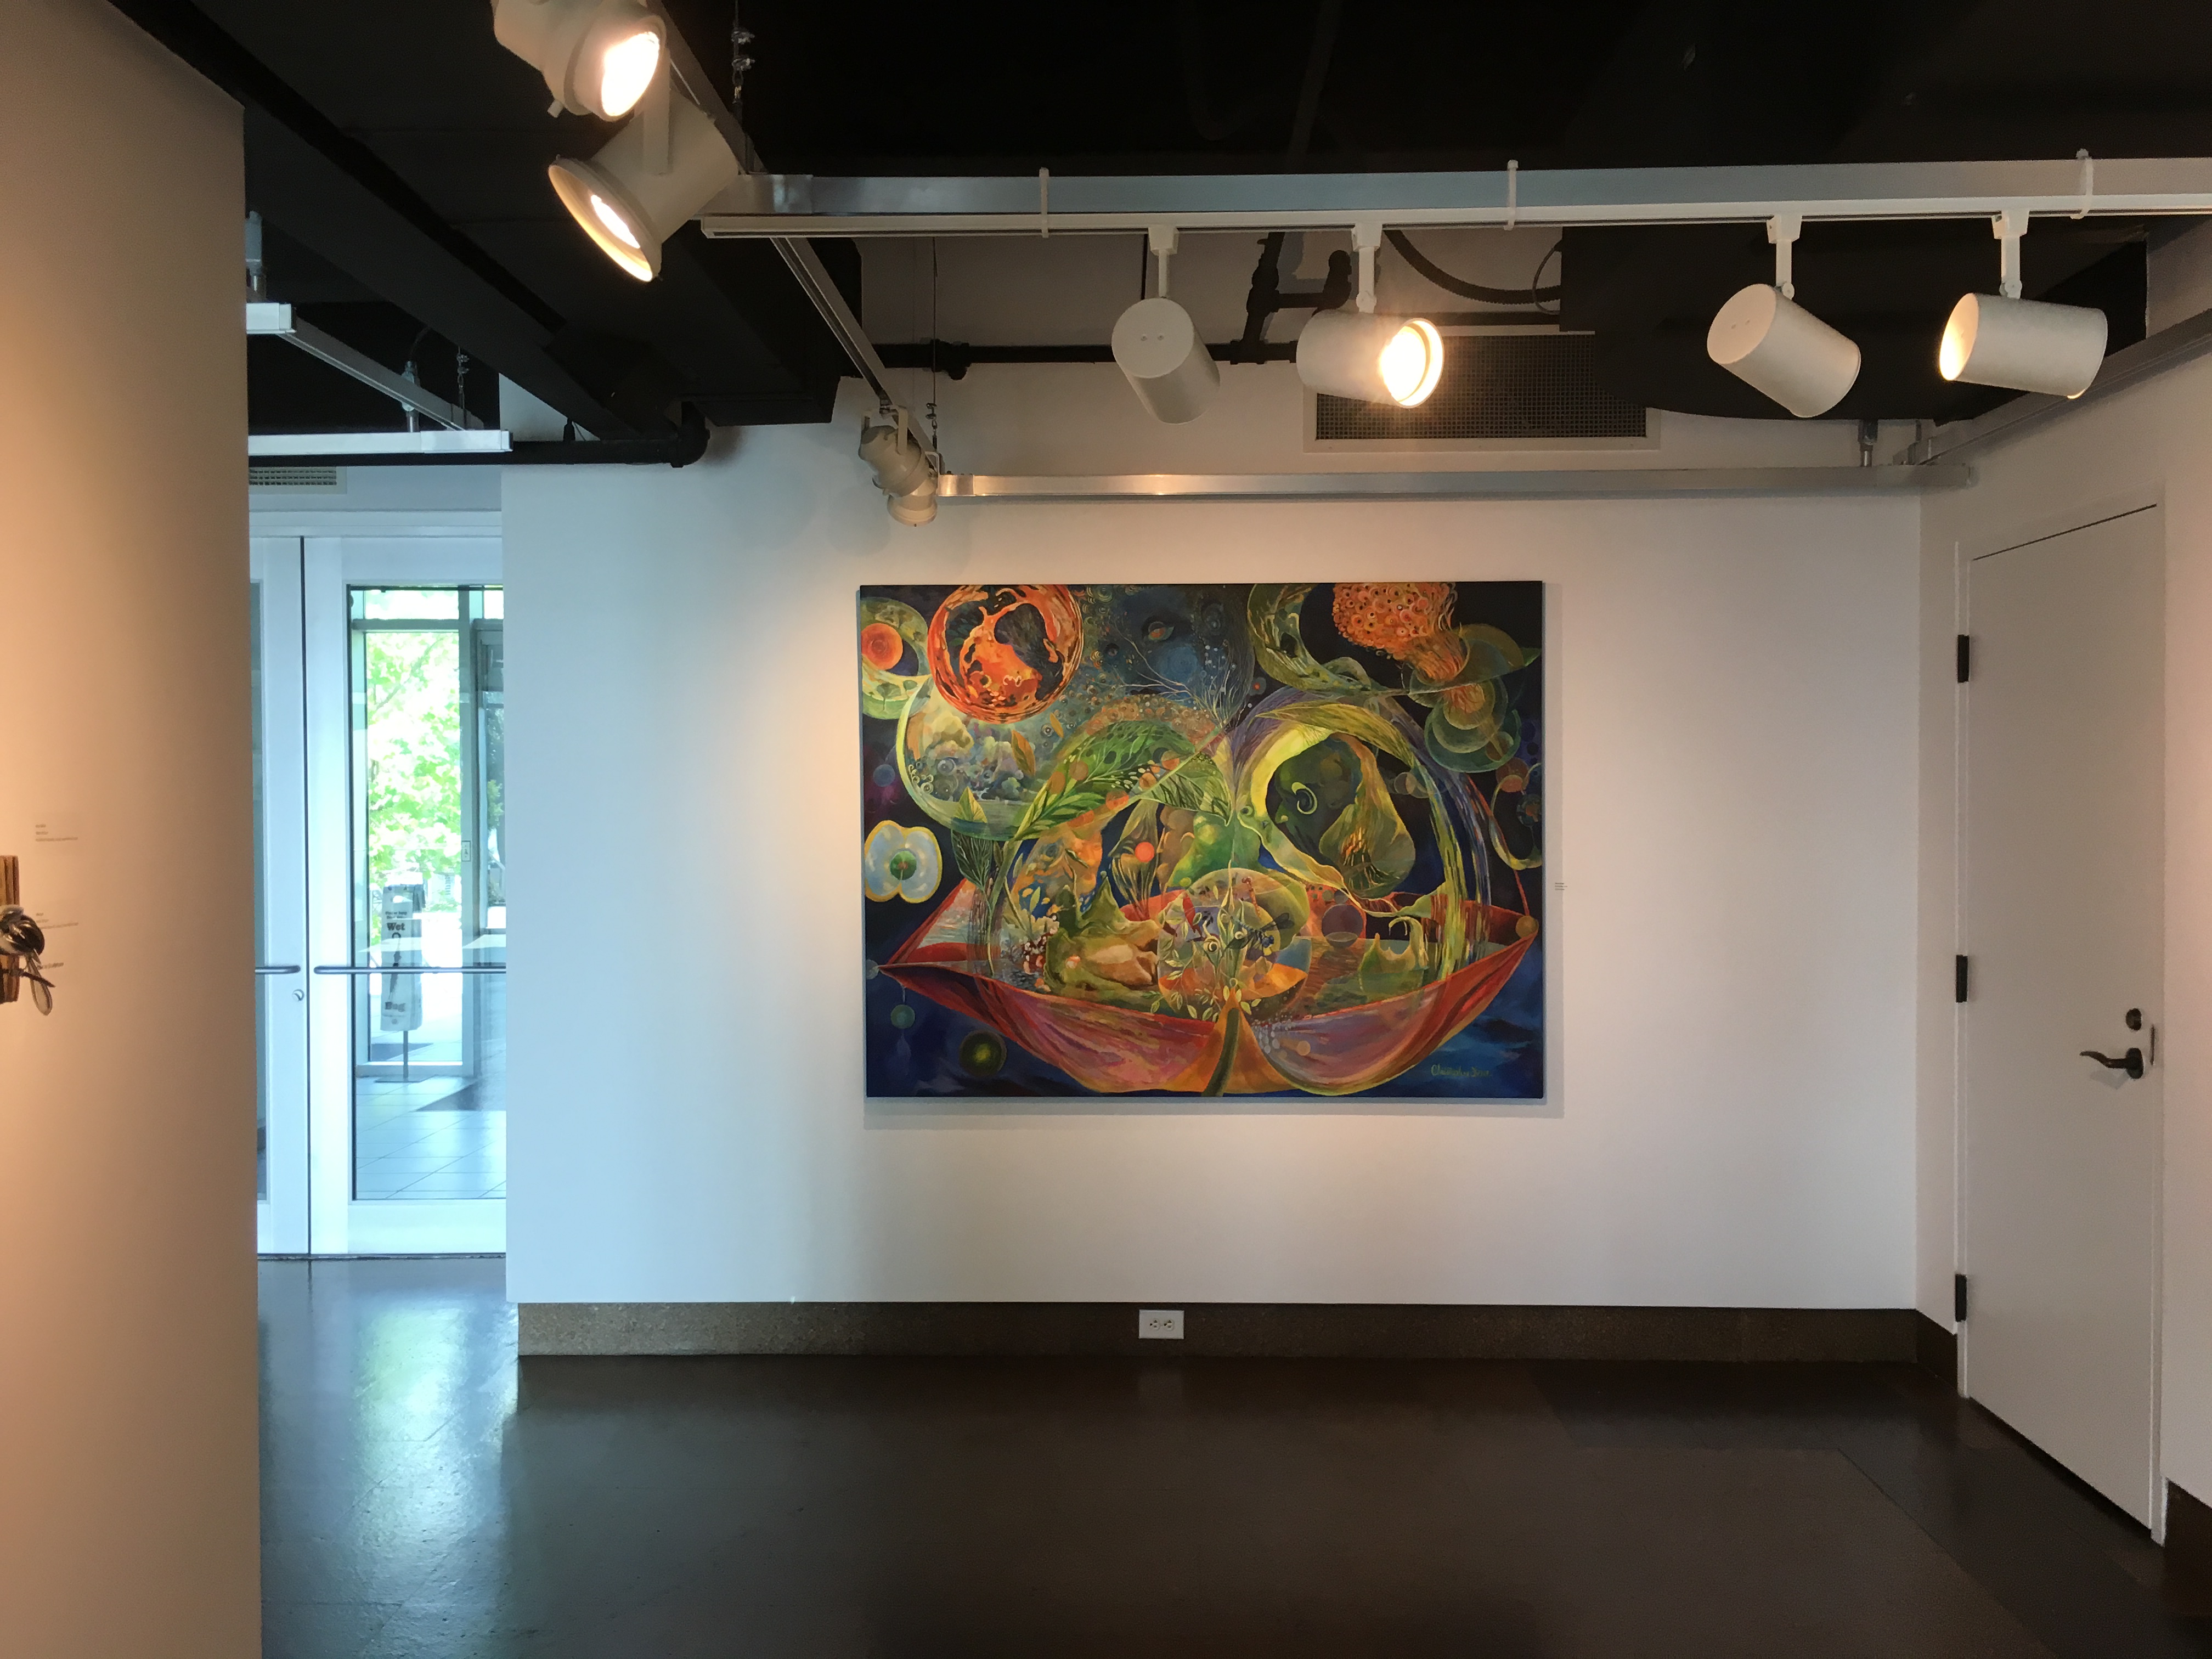 2016 City Gallery Piccolo Spoleto Juried Exhibition Featuring Circle of Life